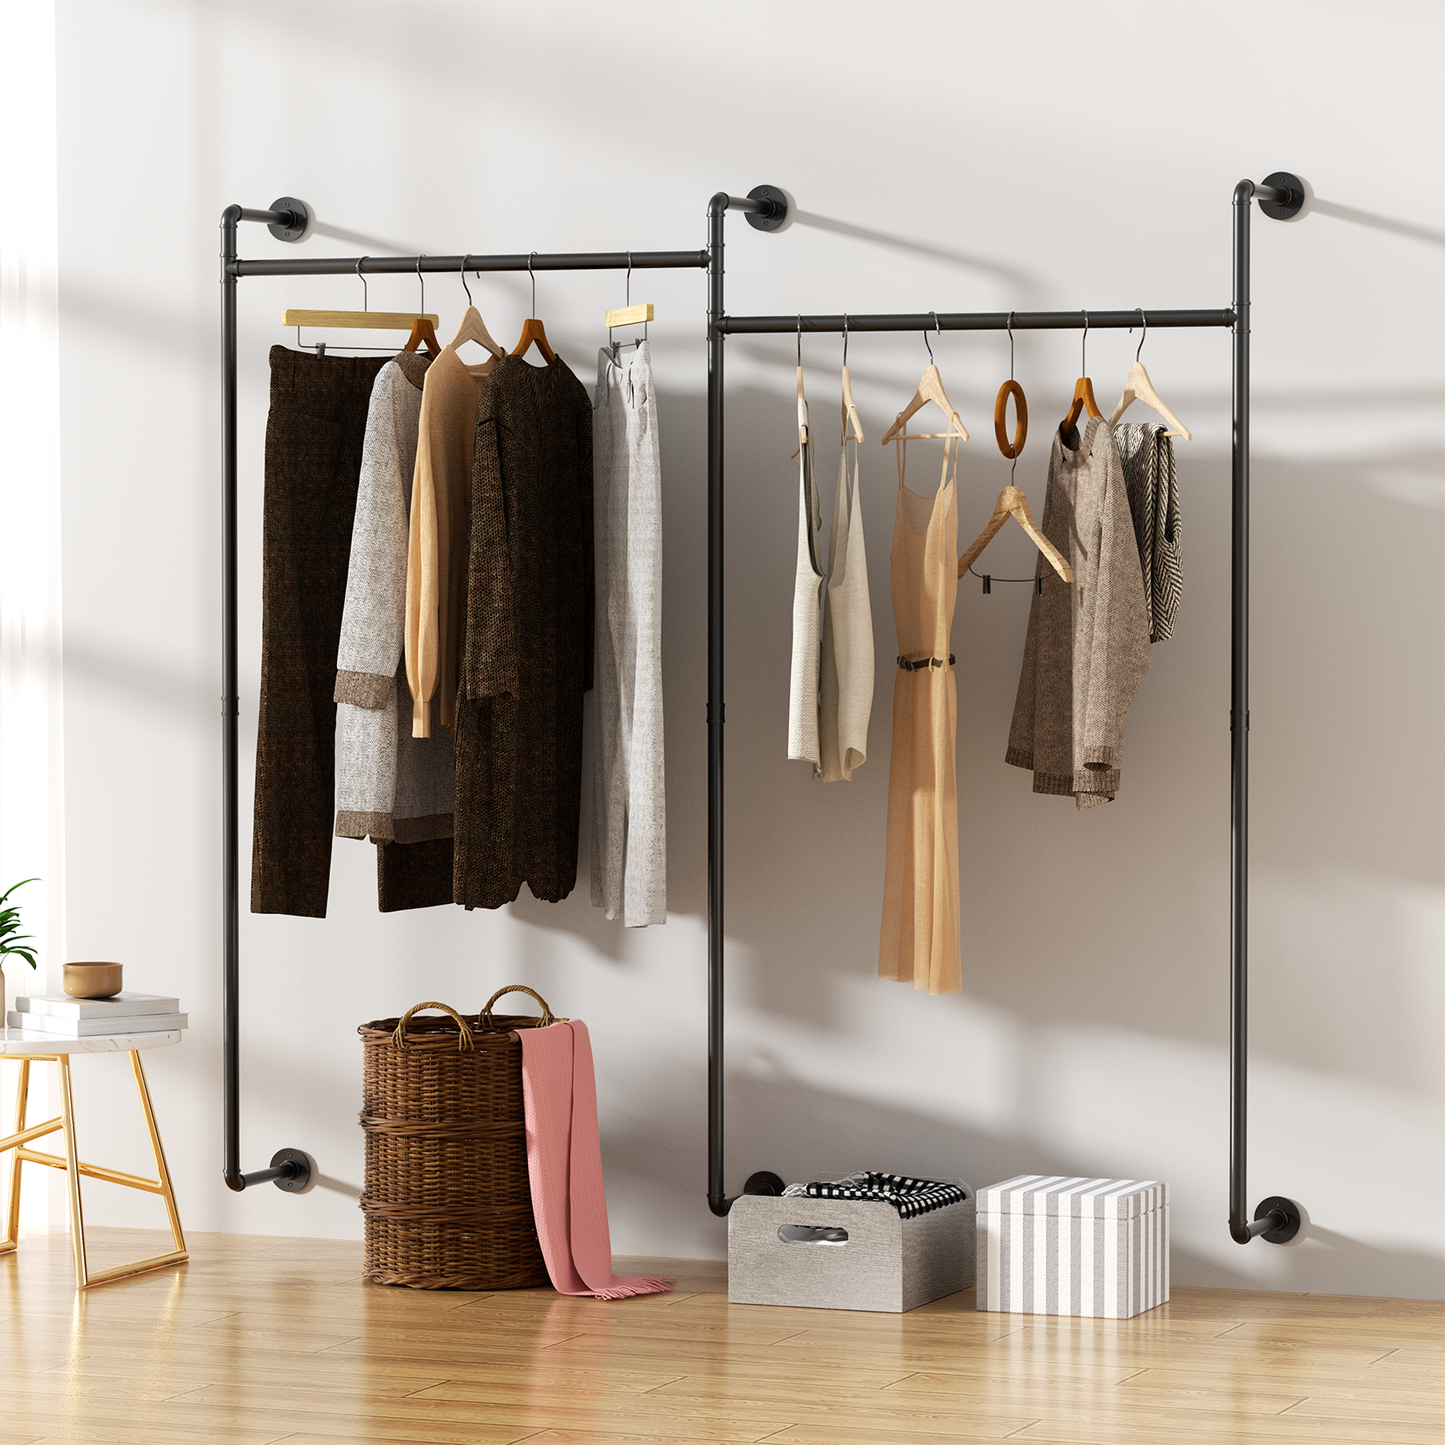 Industrial Pipe Clothing Rack ForClothes Shops, Bedroom Closet